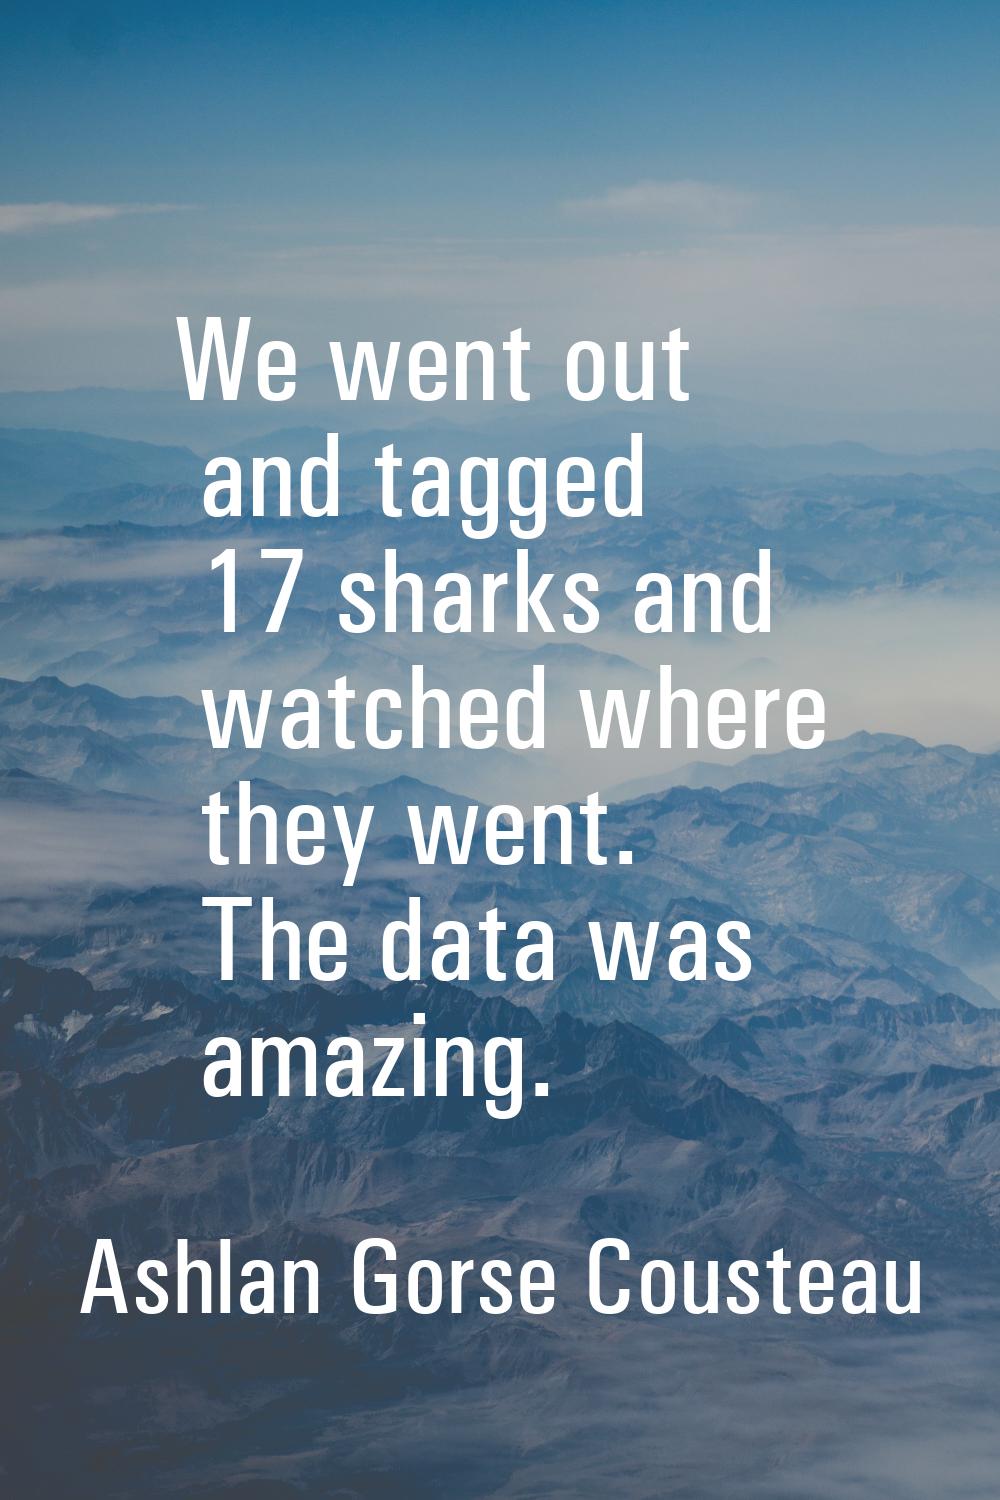 We went out and tagged 17 sharks and watched where they went. The data was amazing.